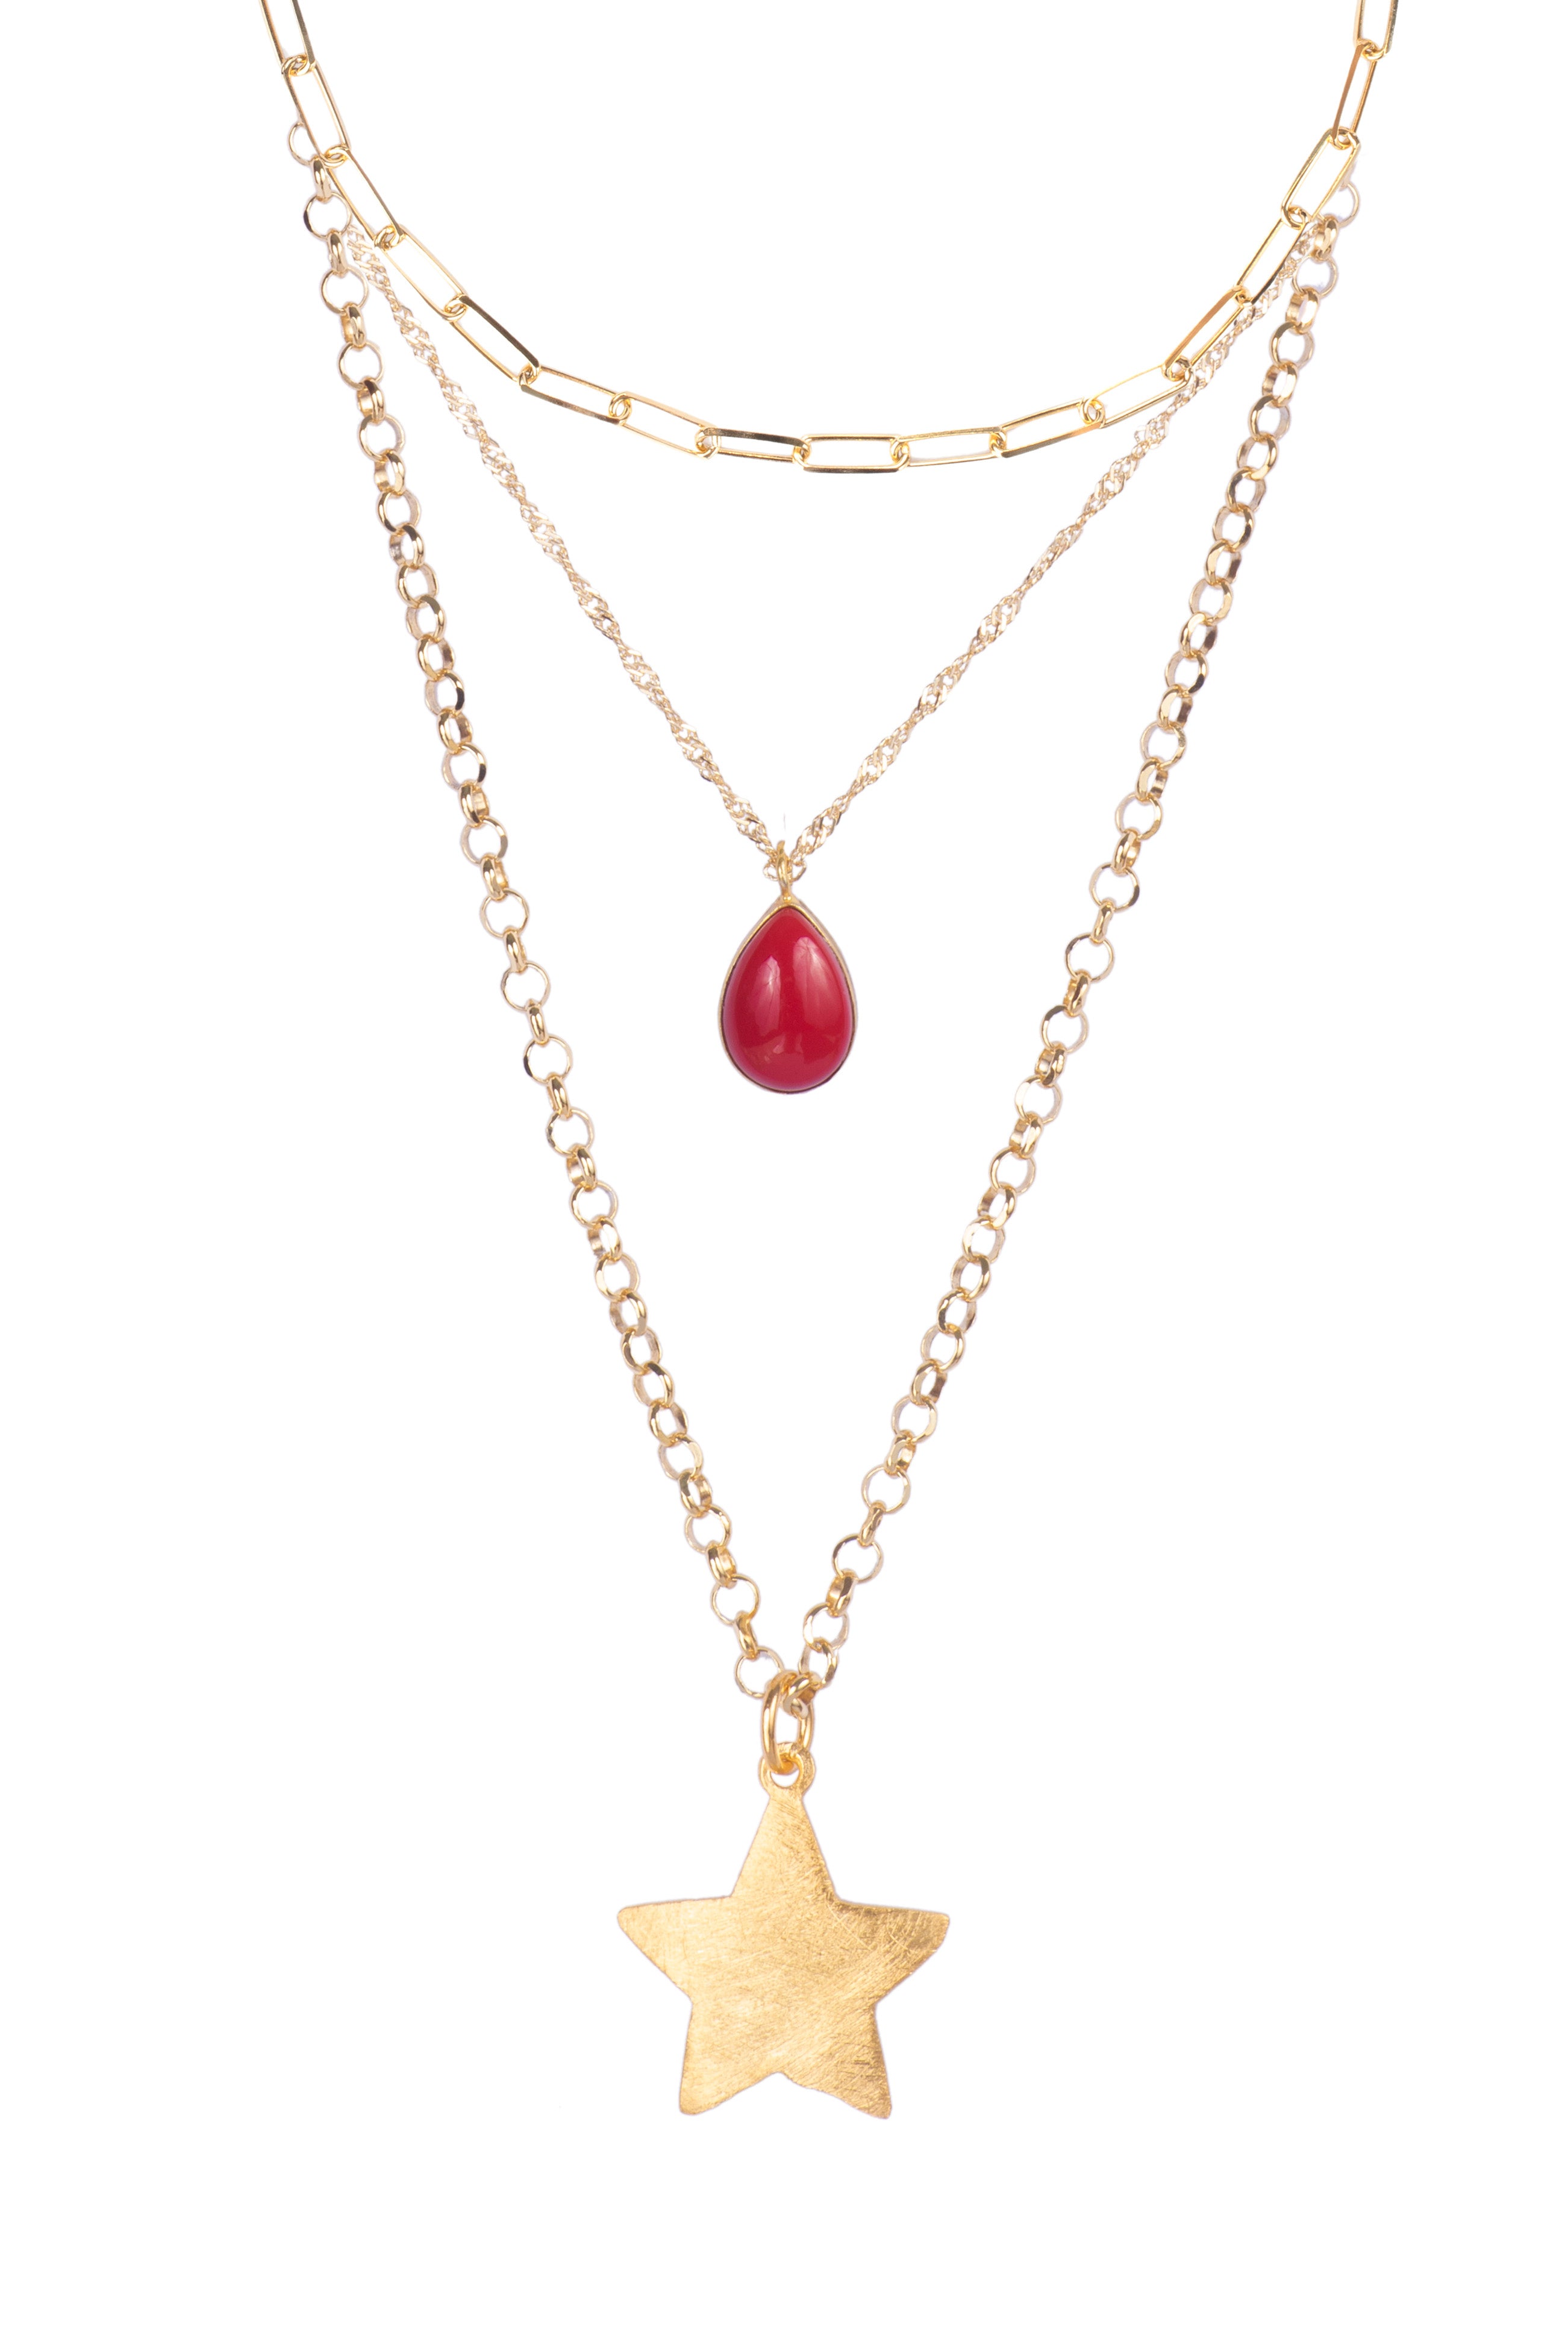 PAPERCLIP + CORAL + STAR NECKLACE || SET